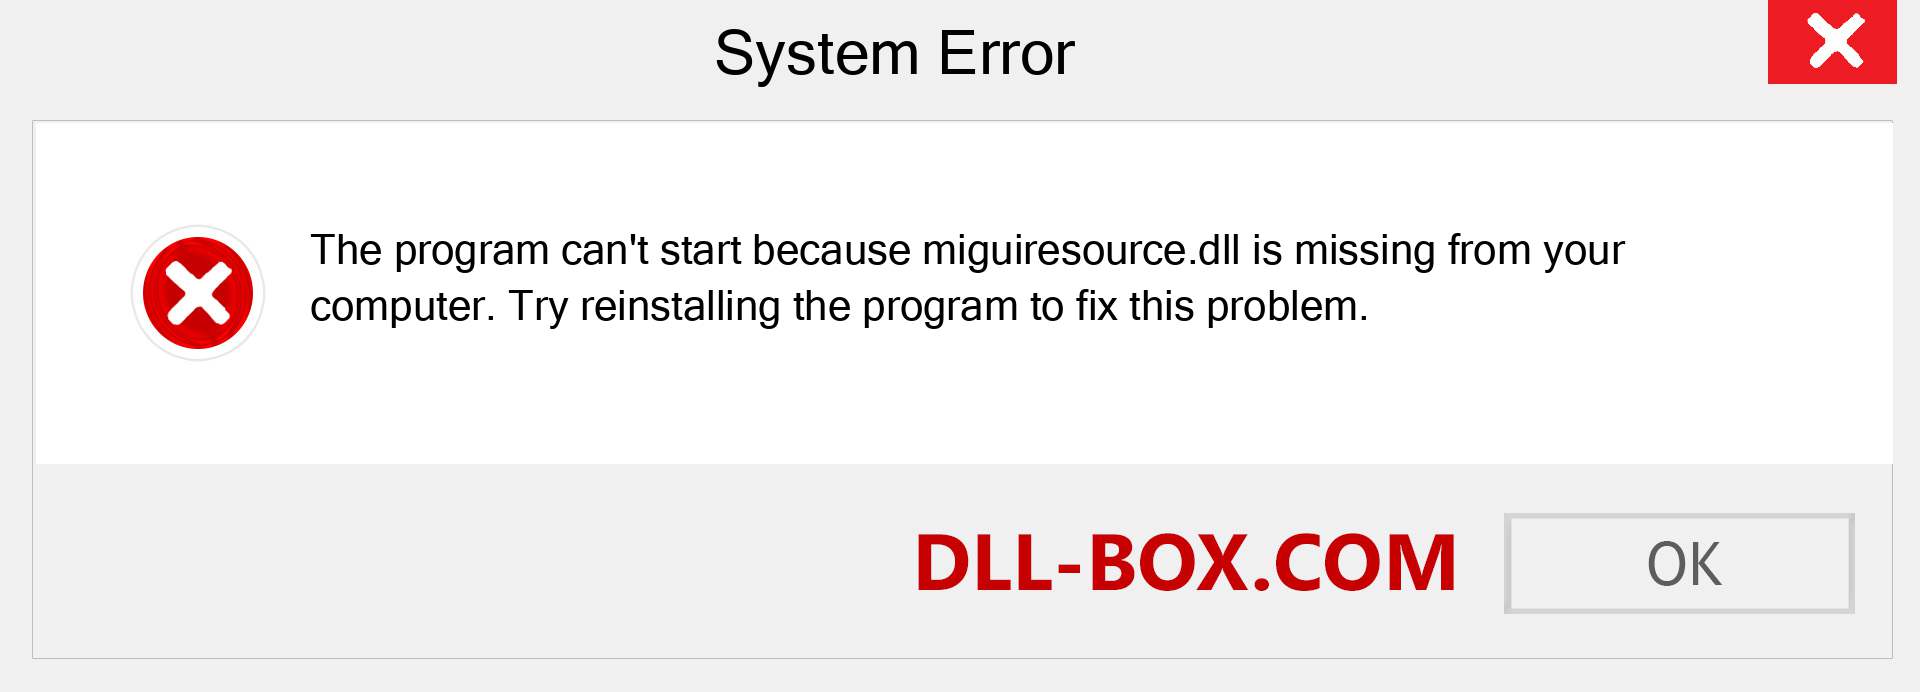  miguiresource.dll file is missing?. Download for Windows 7, 8, 10 - Fix  miguiresource dll Missing Error on Windows, photos, images